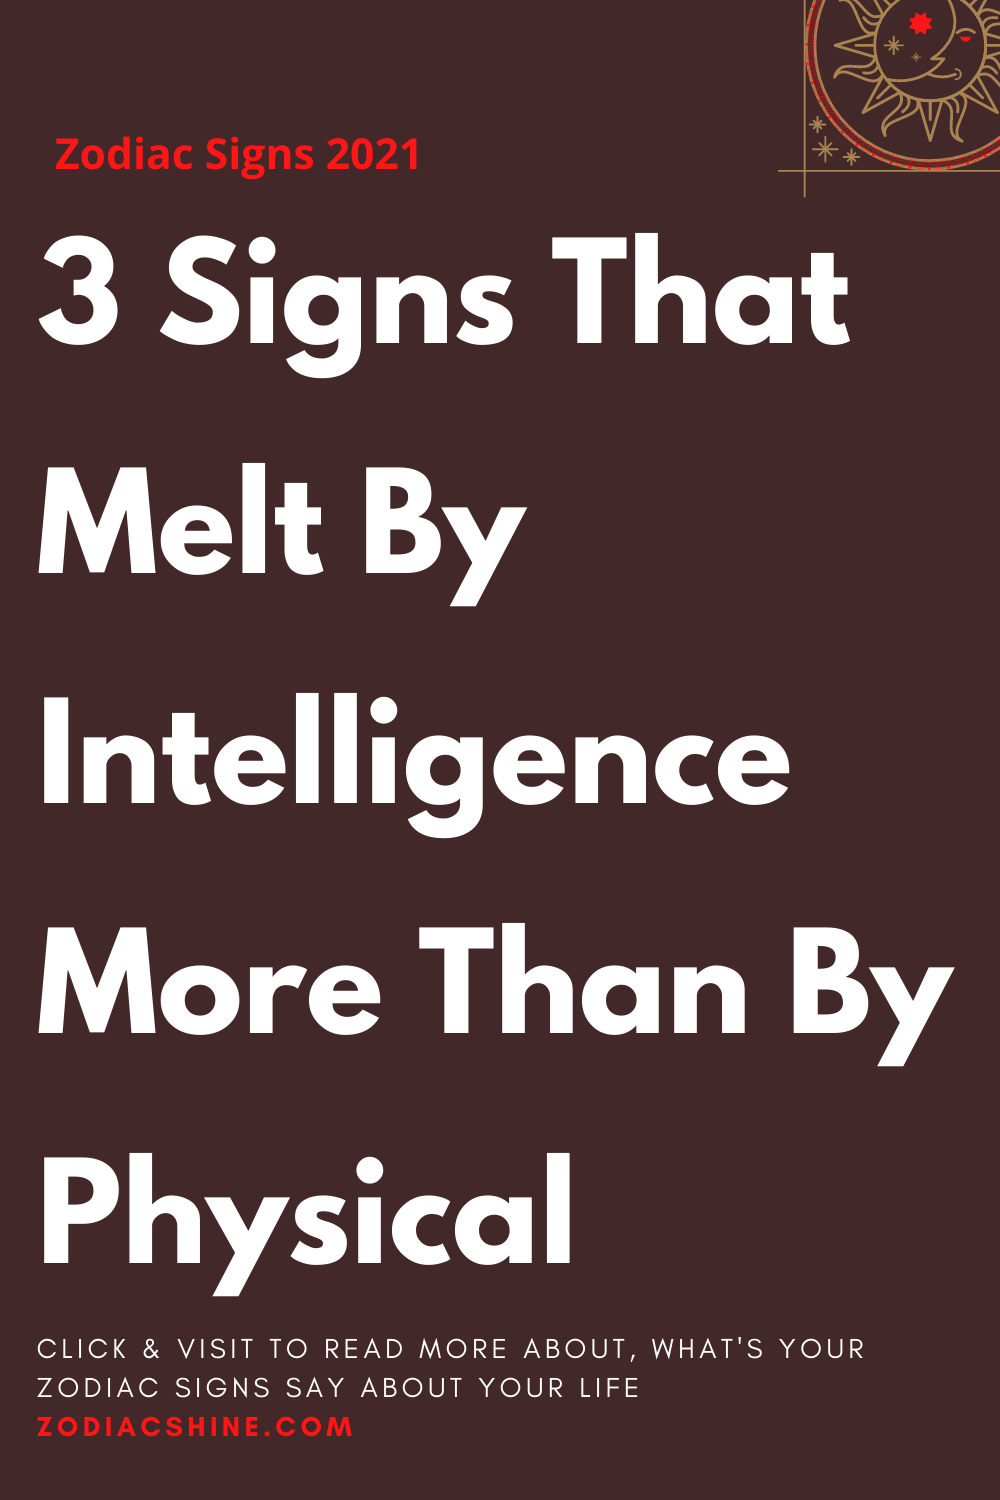 3 Signs That Melt By Intelligence More Than By Physical